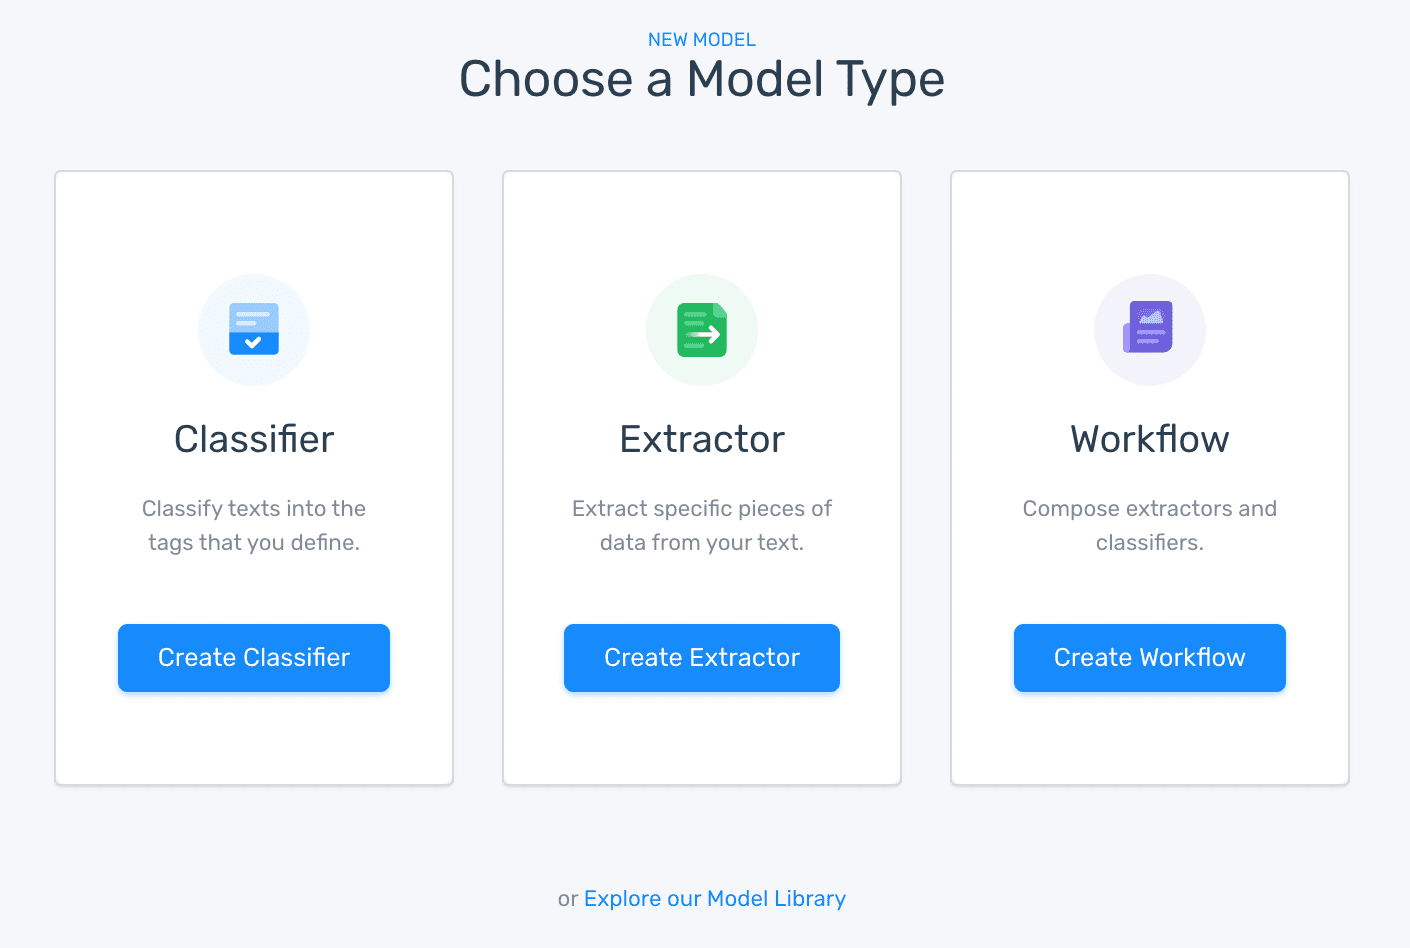 The option to choose a model type: Classifier, Extractor, or Workflow.